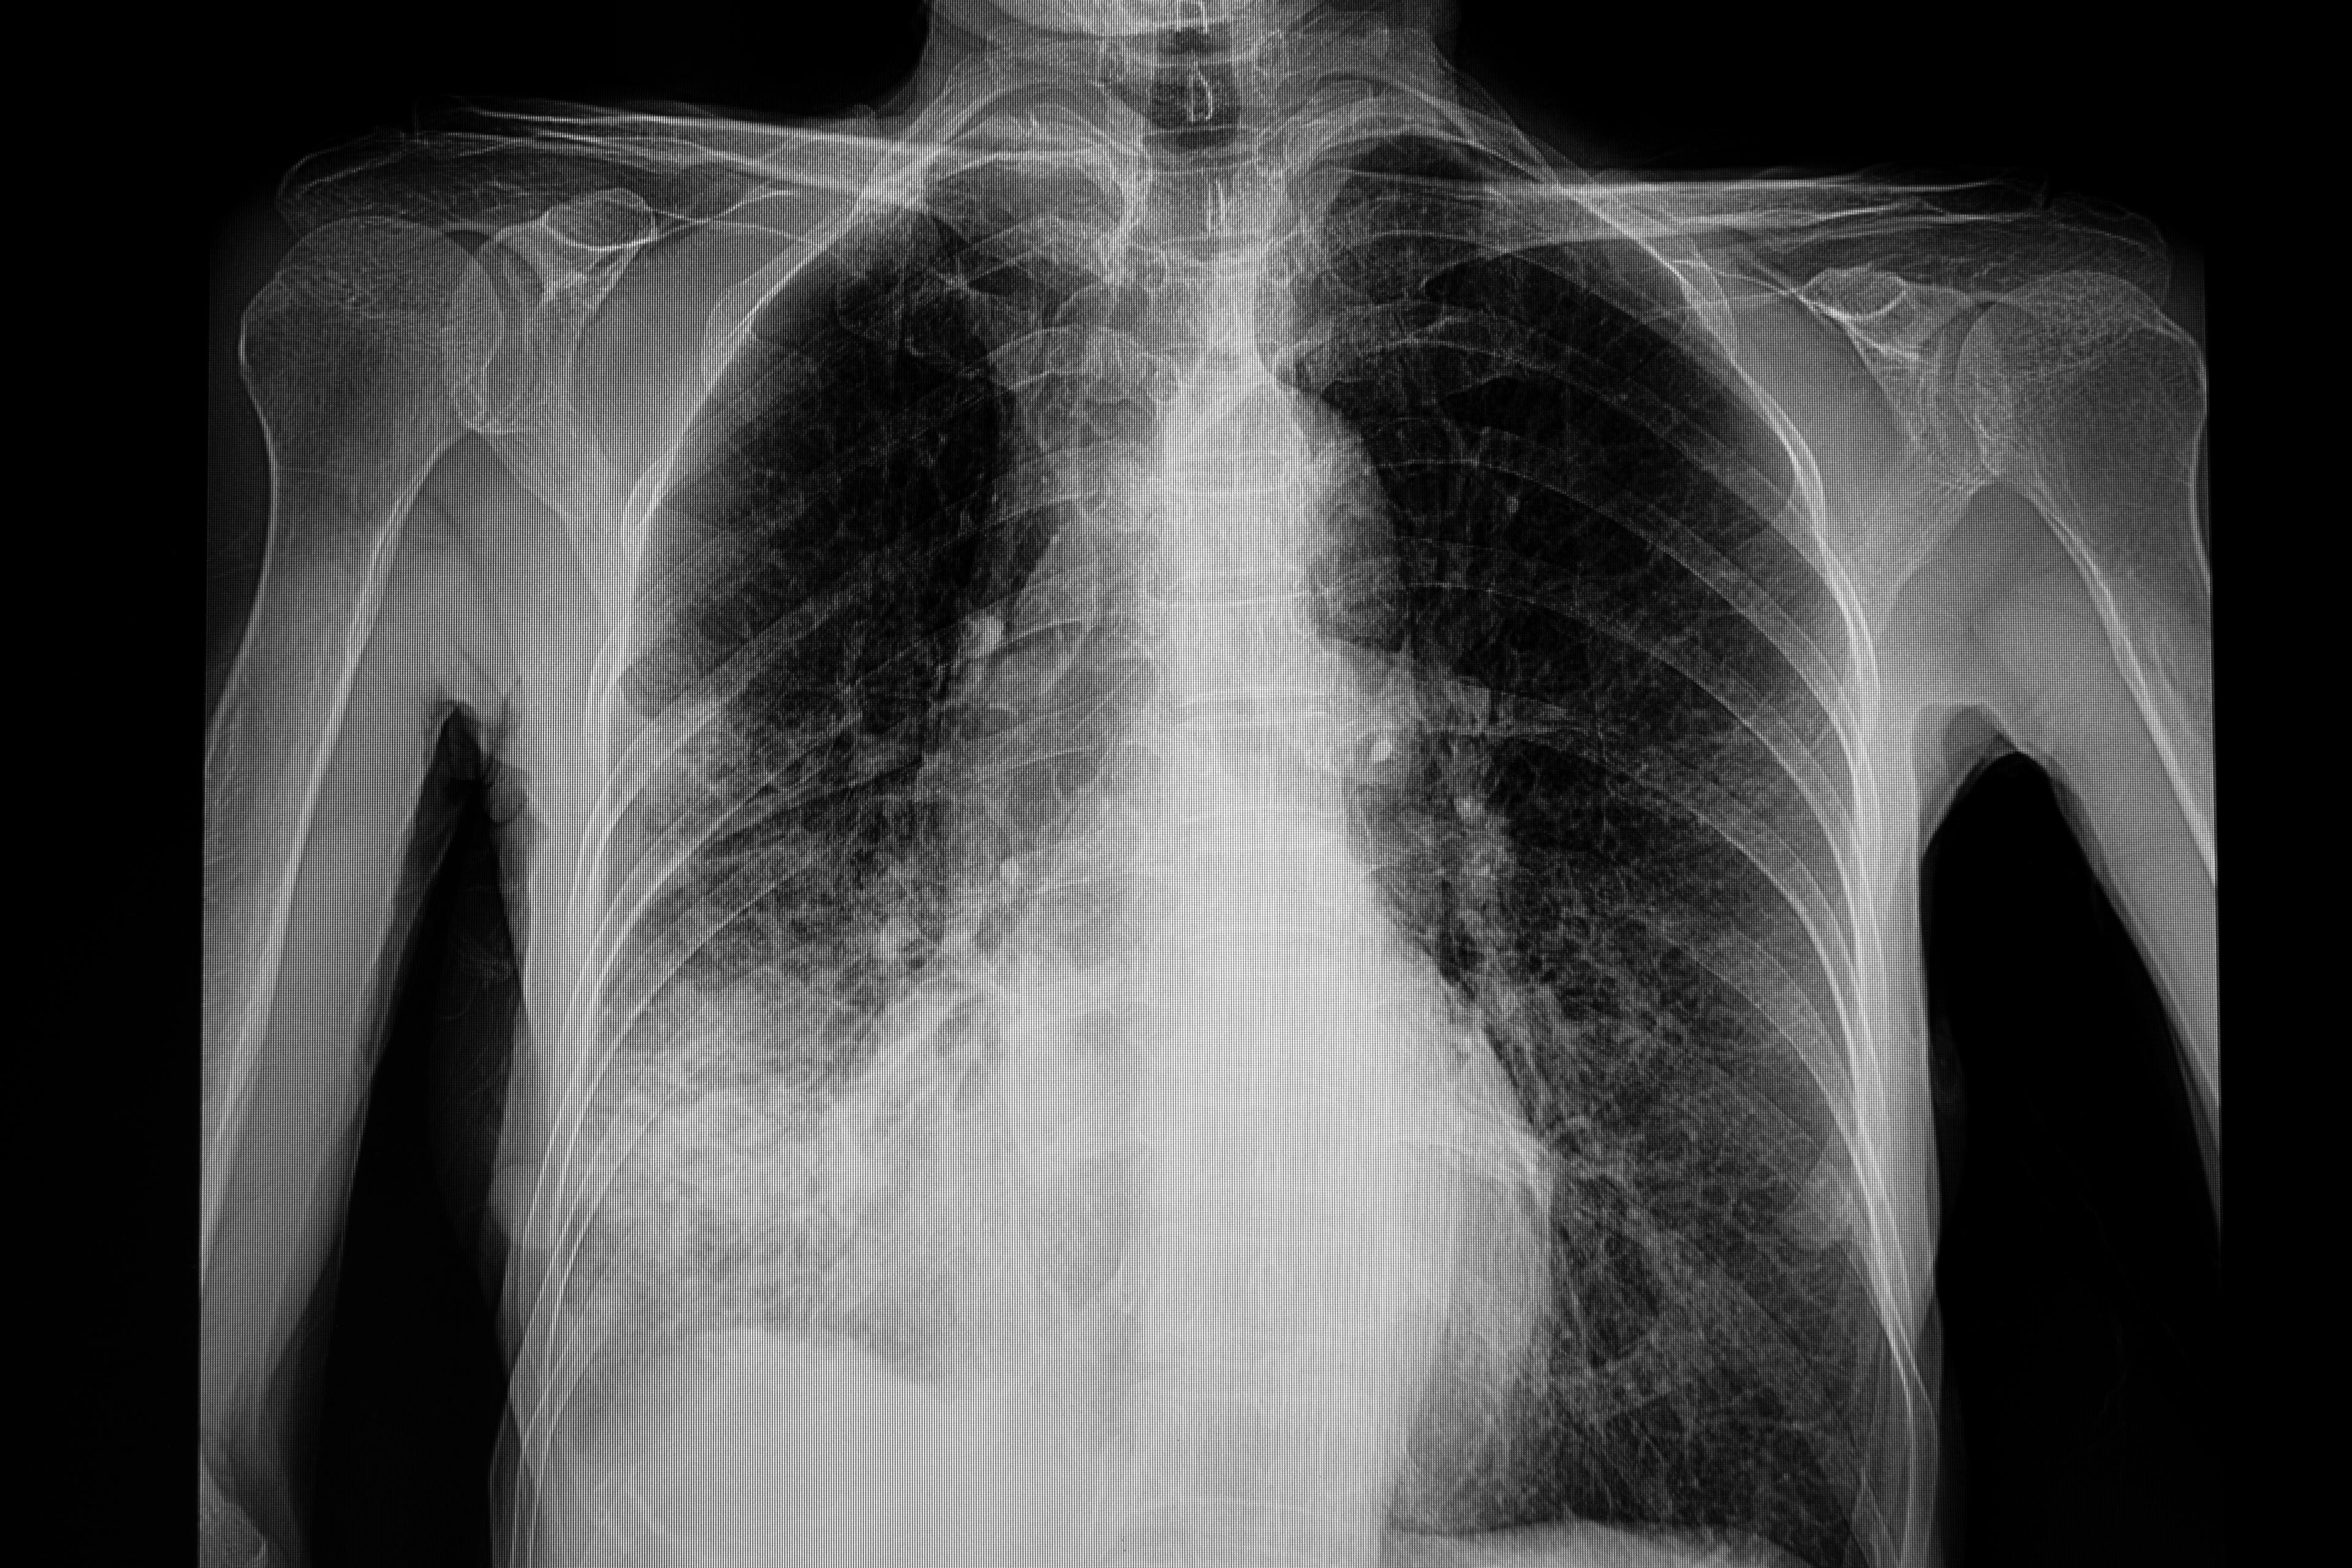 New Study Shows Impact of COVID-19 and Comorbidities in Inner-City Lung Screening Cohort